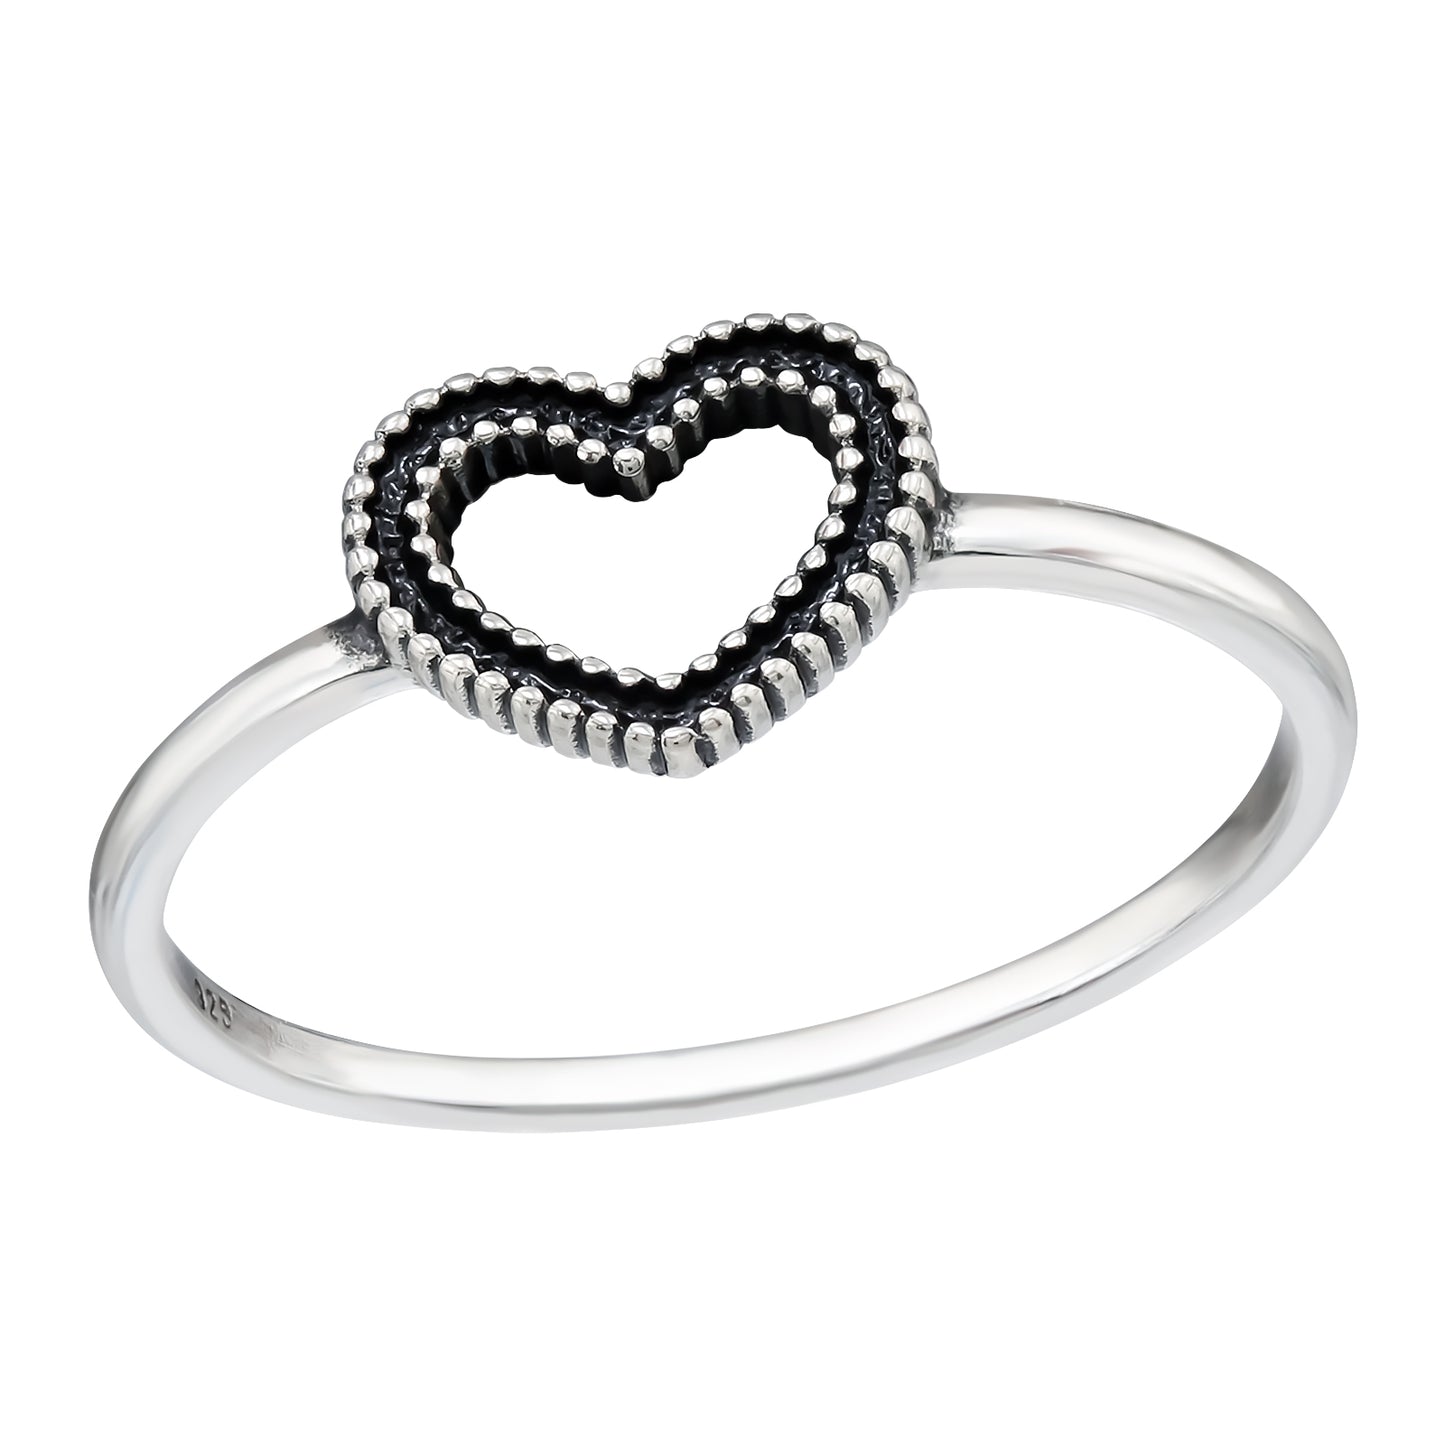 Heart Outline Ring - Oxidized 925 Sterling Silver